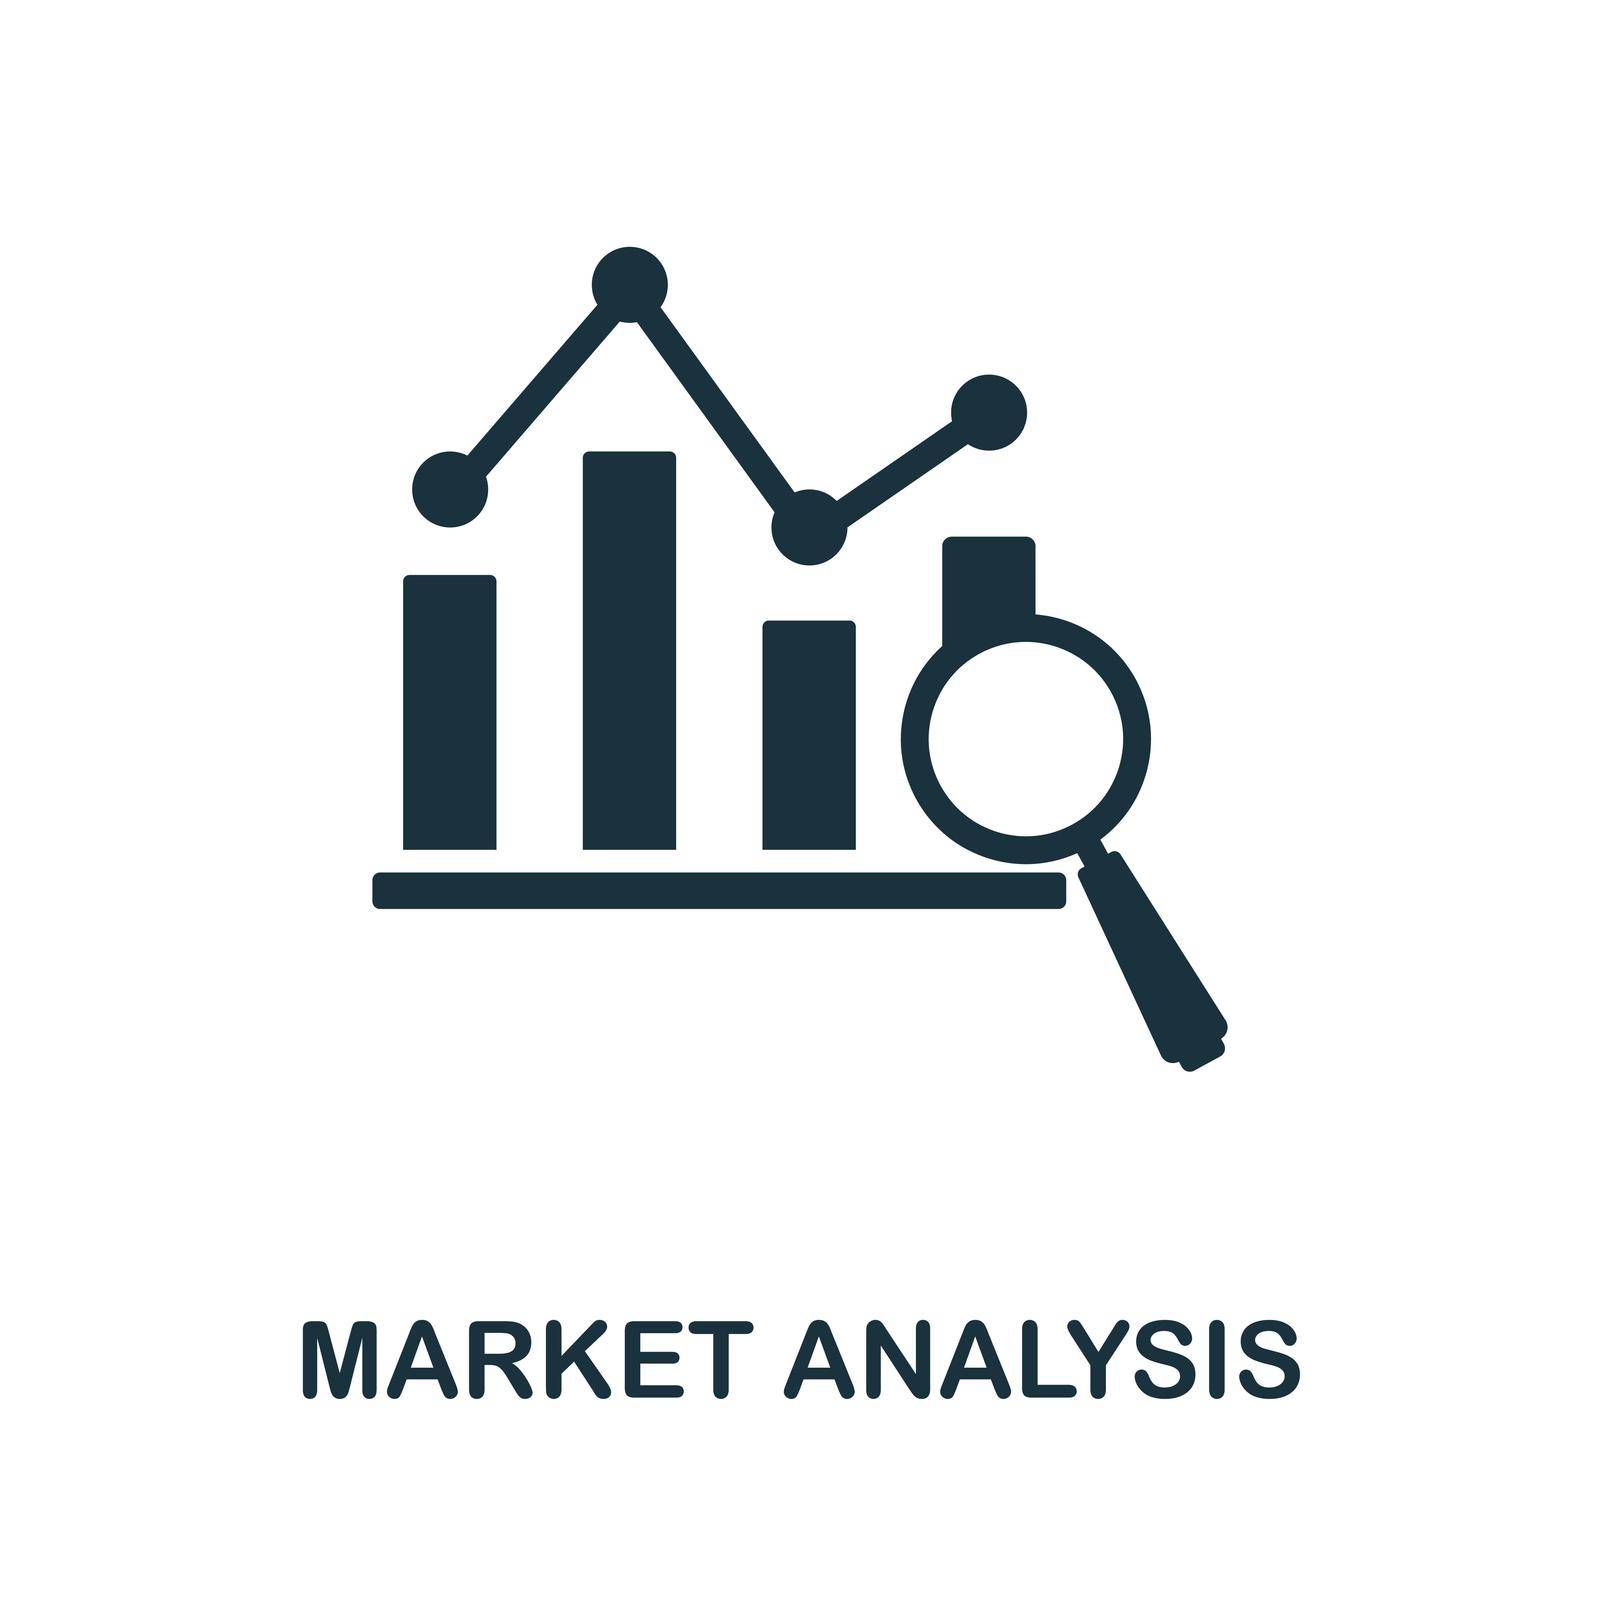 Market Analysis icon. Simple line element market analysis symbol for templates, web design and infographics.